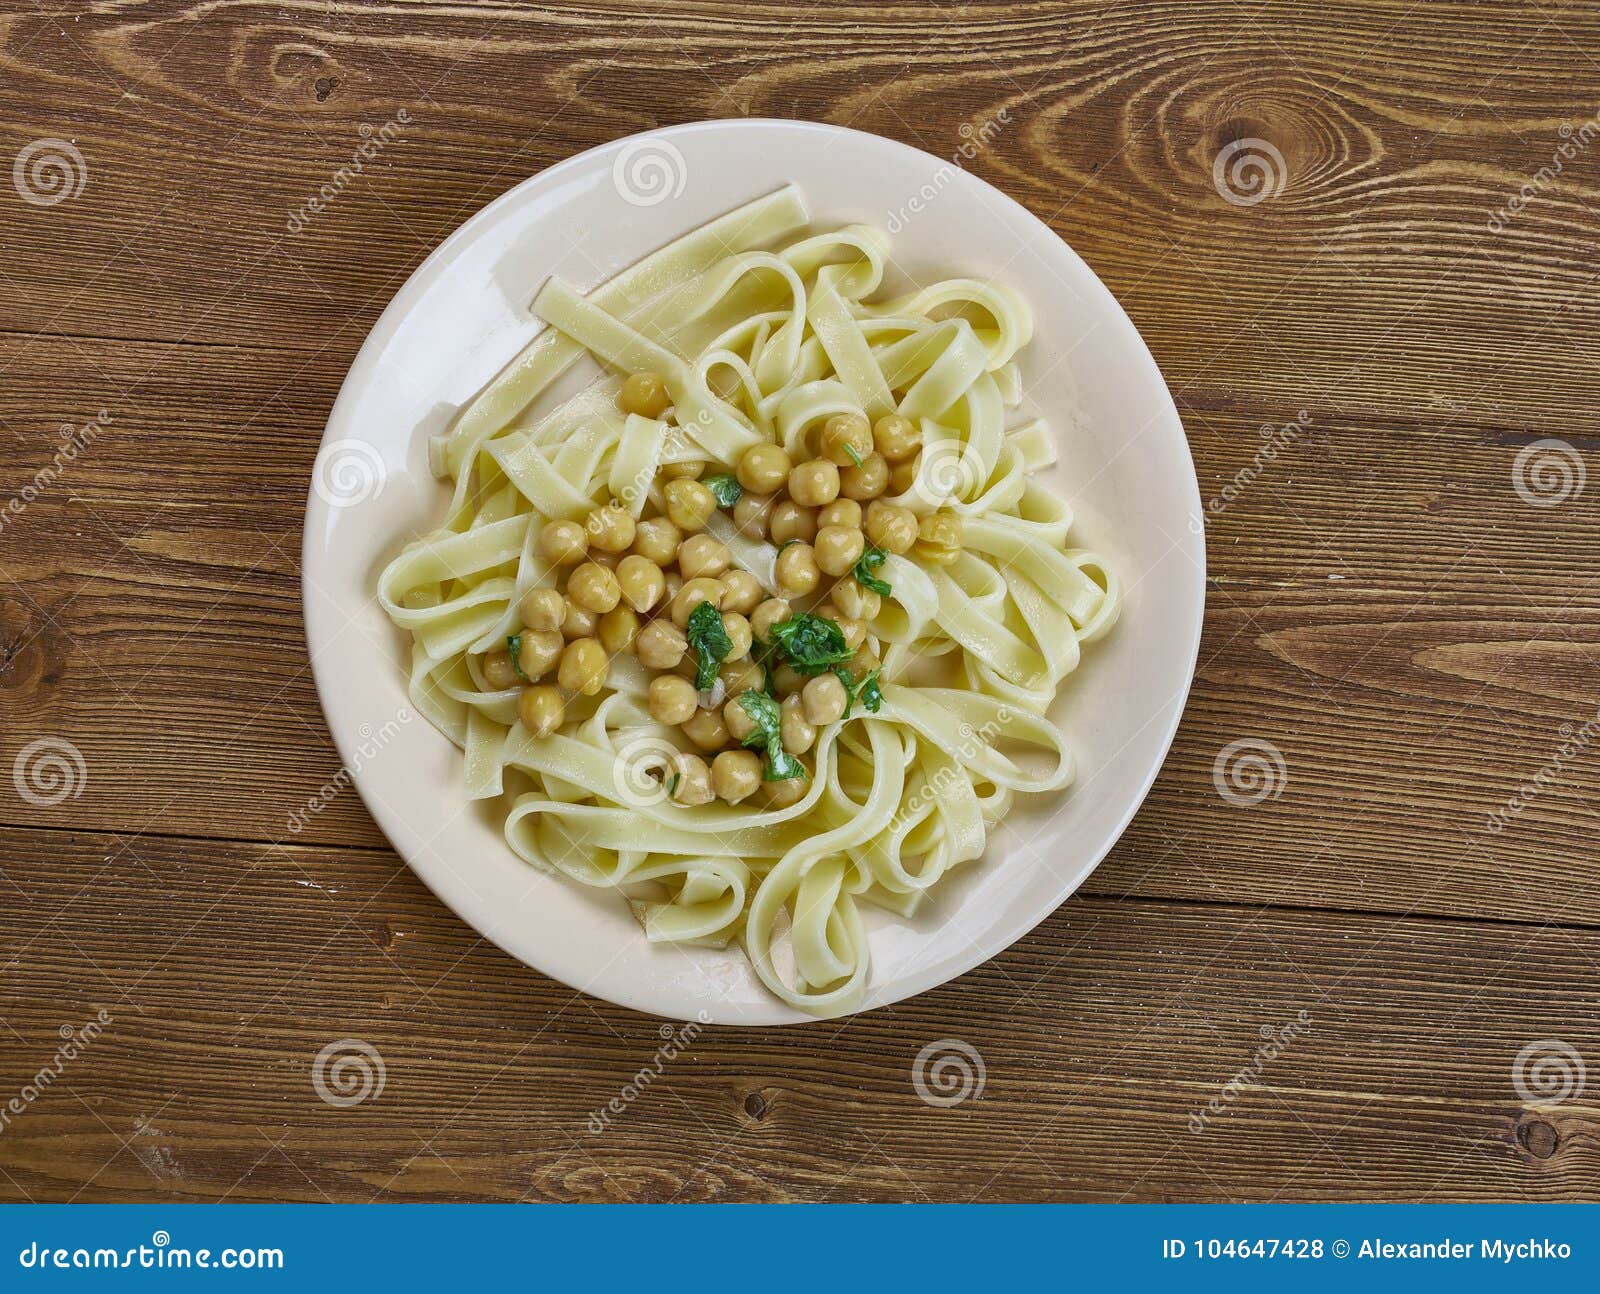 calabrian pasta with chickpea